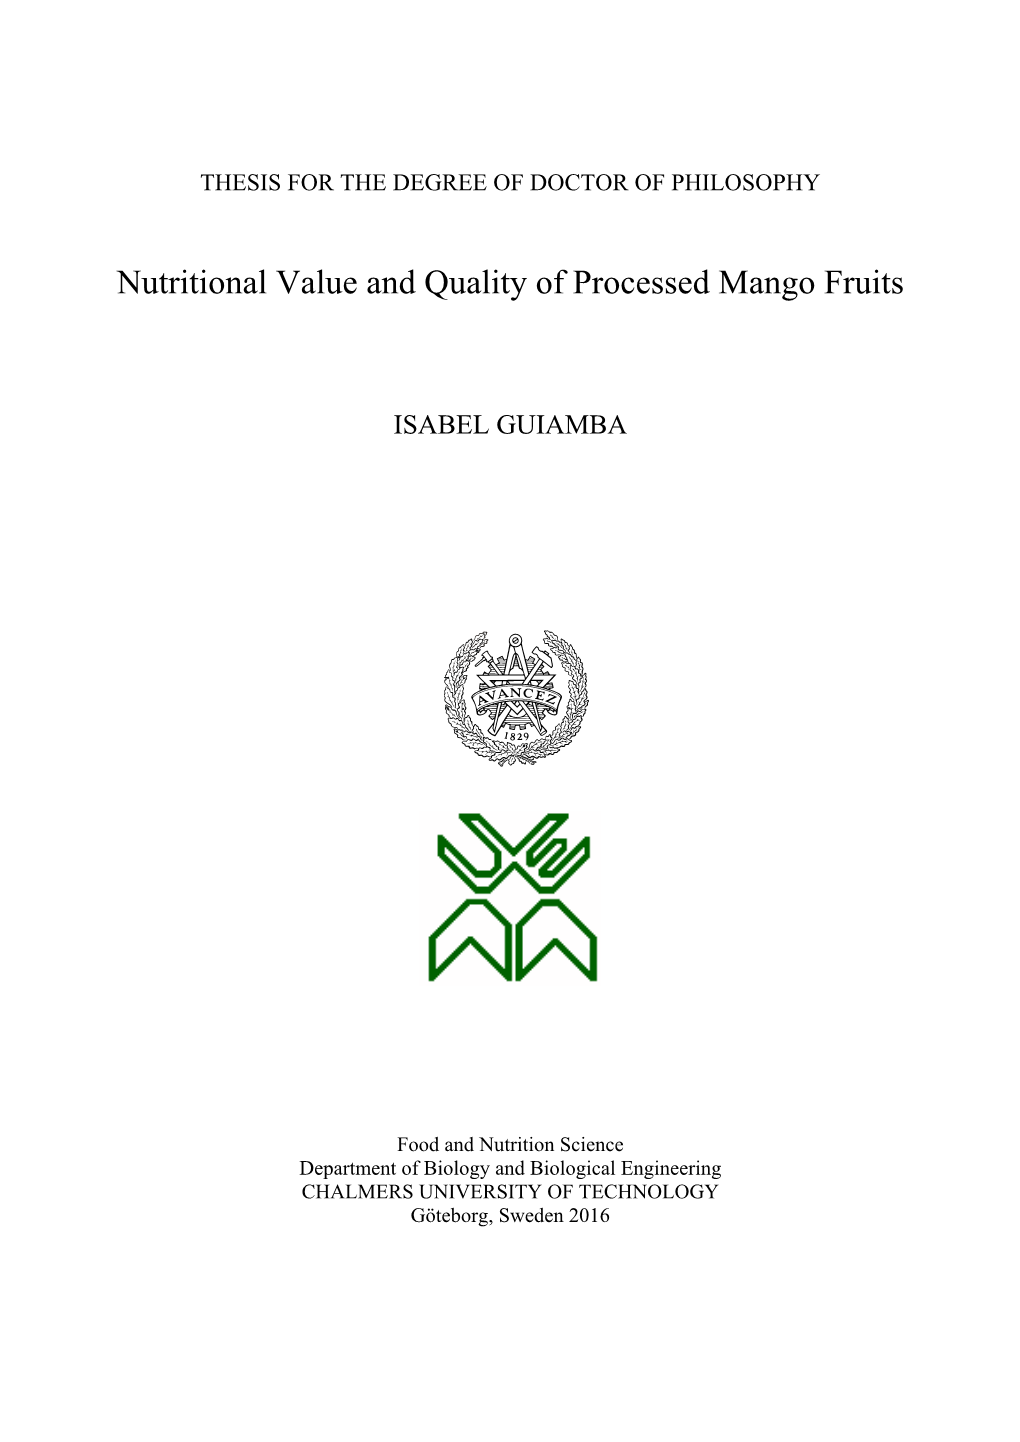 Nutritional Value and Quality of Processed Mango Fruits